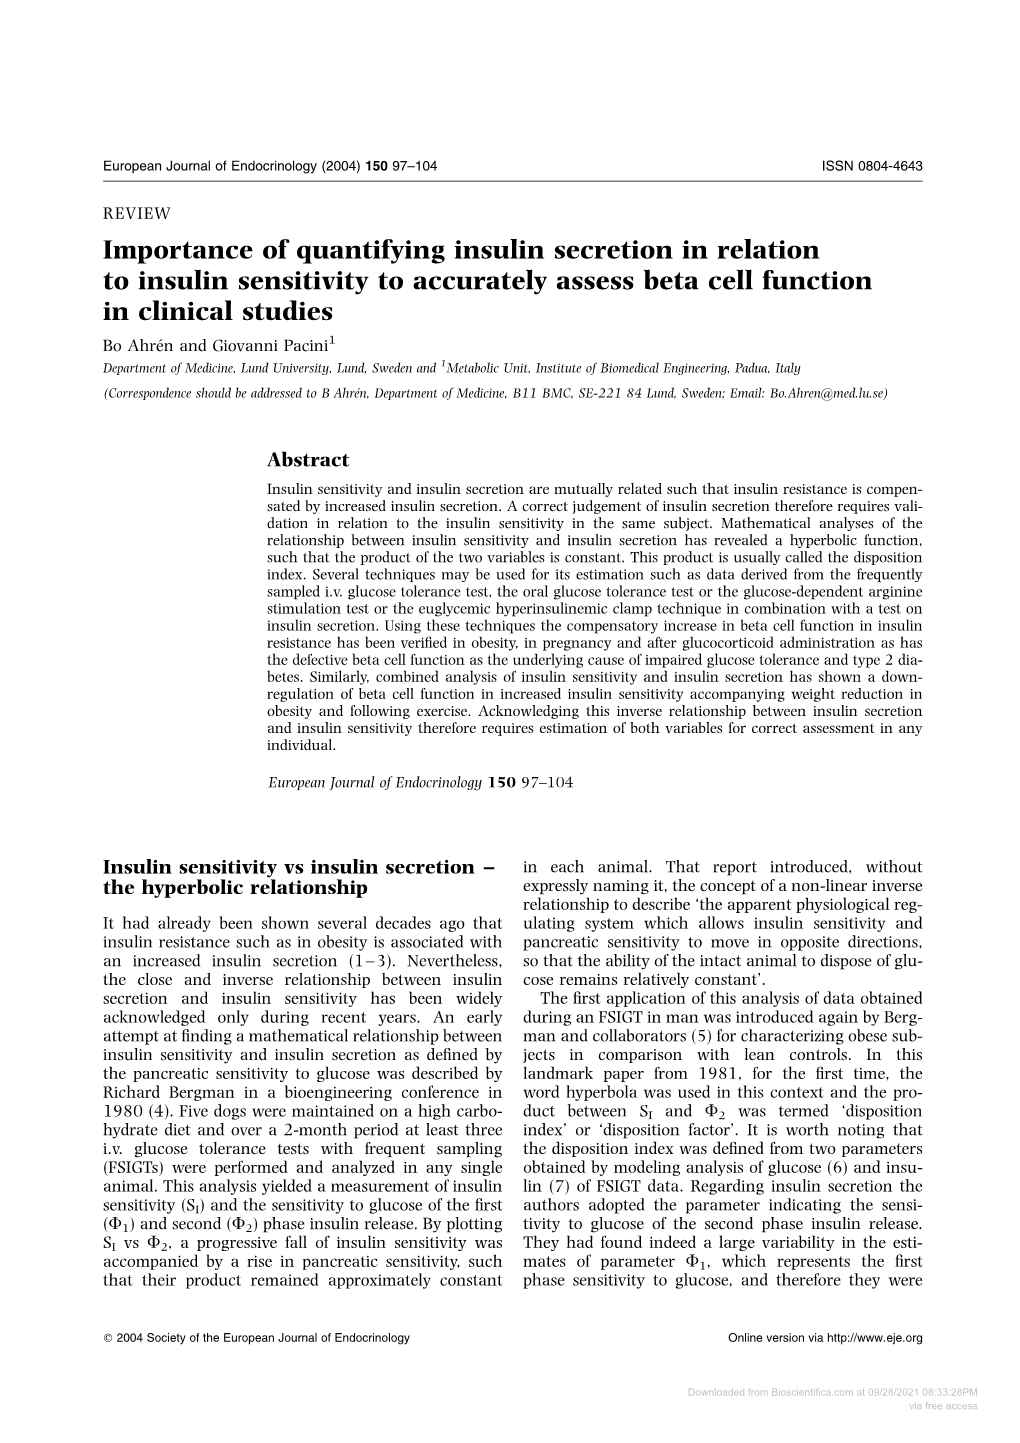 Importance of Quantifying Insulin Secretion in Relation to Insulin